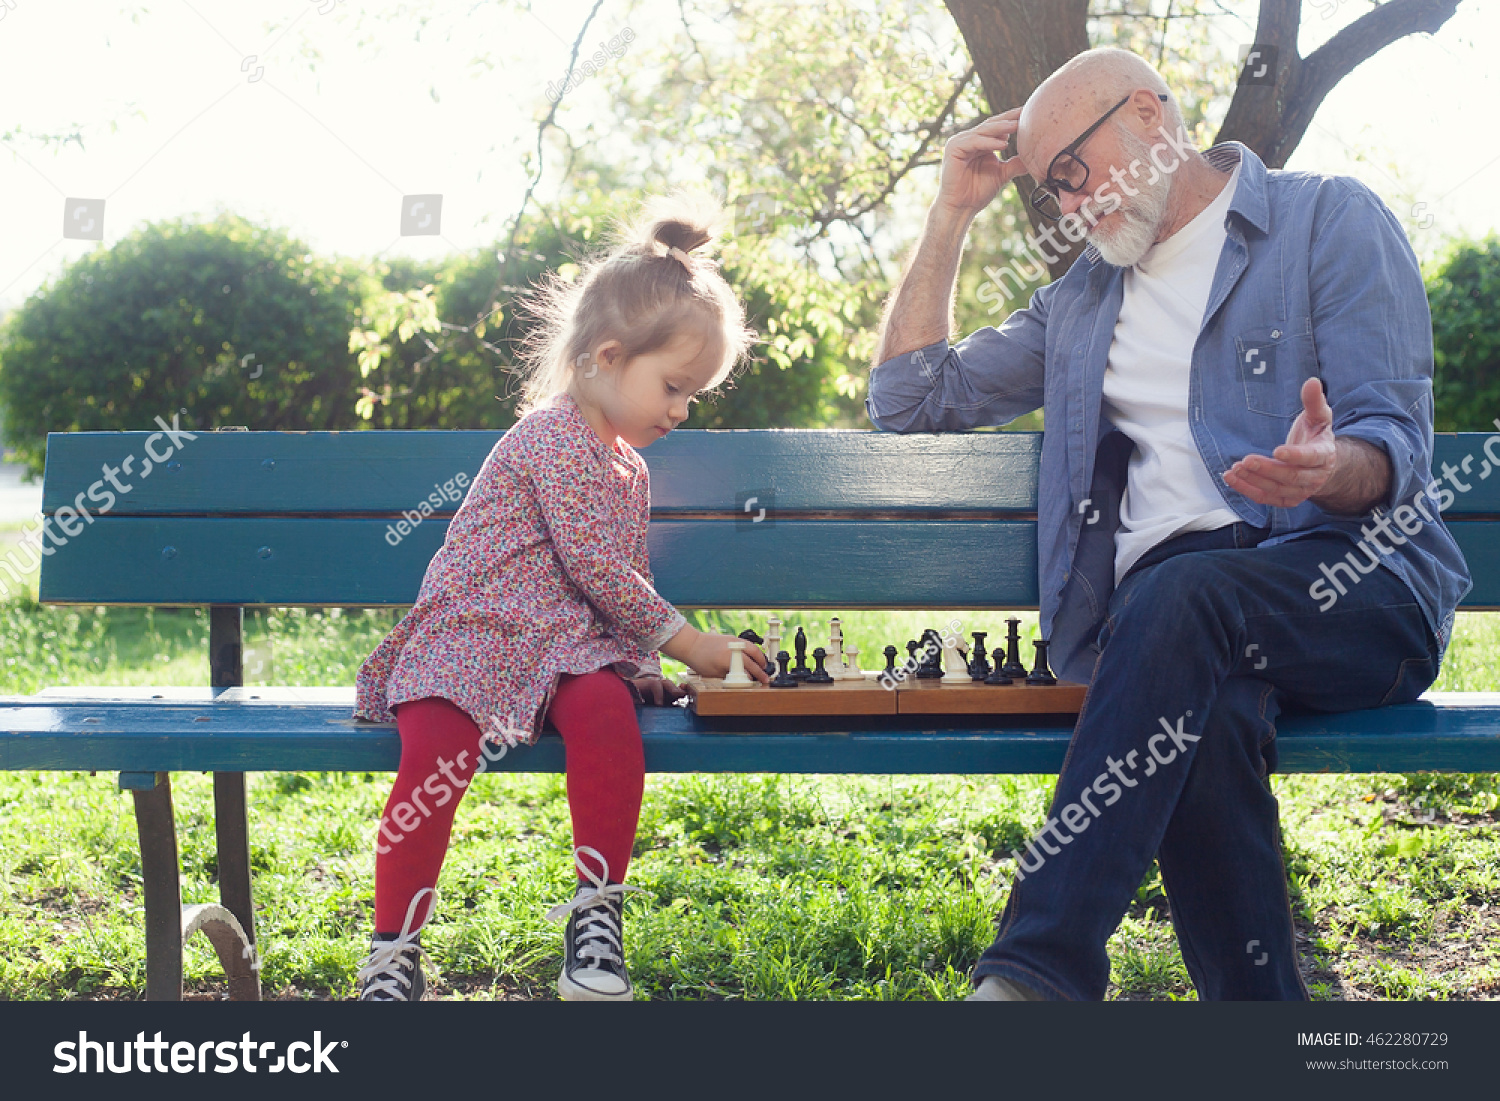 Grandfather and granddaughter spending time together #462280729